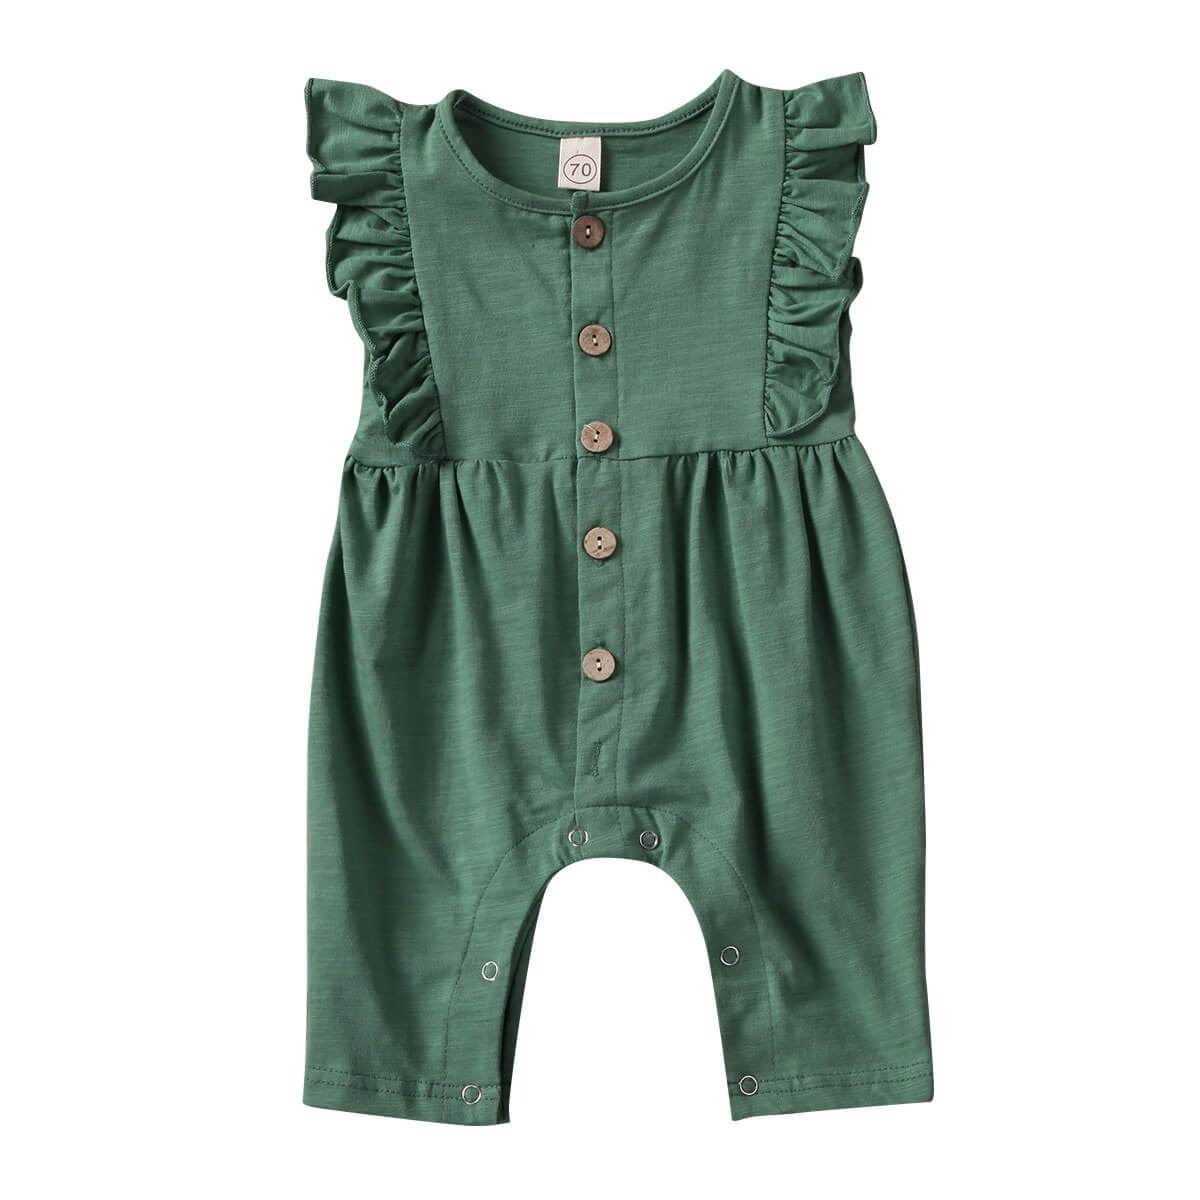 Ruffled Solid Baby Jumpsuit Green 3-6 M 